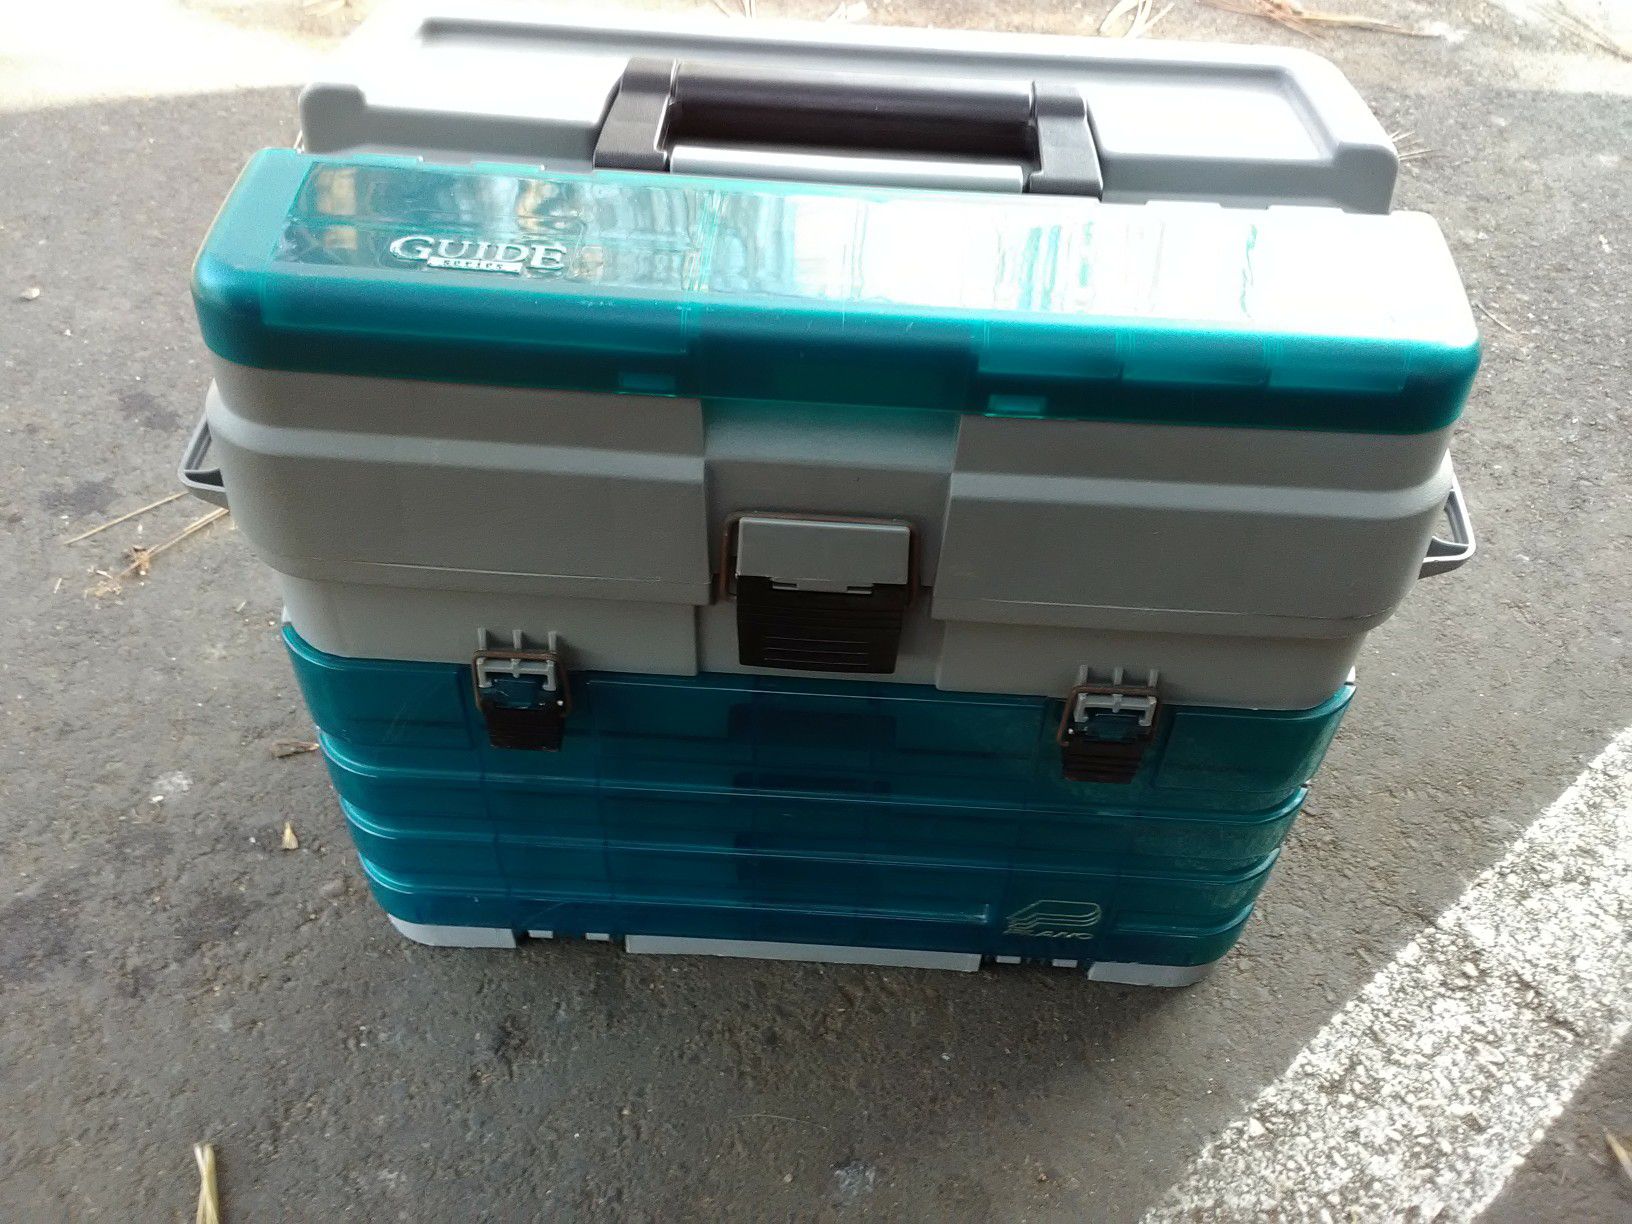 Plano Guide Series Tackle Box for Sale in San Diego, CA - OfferUp